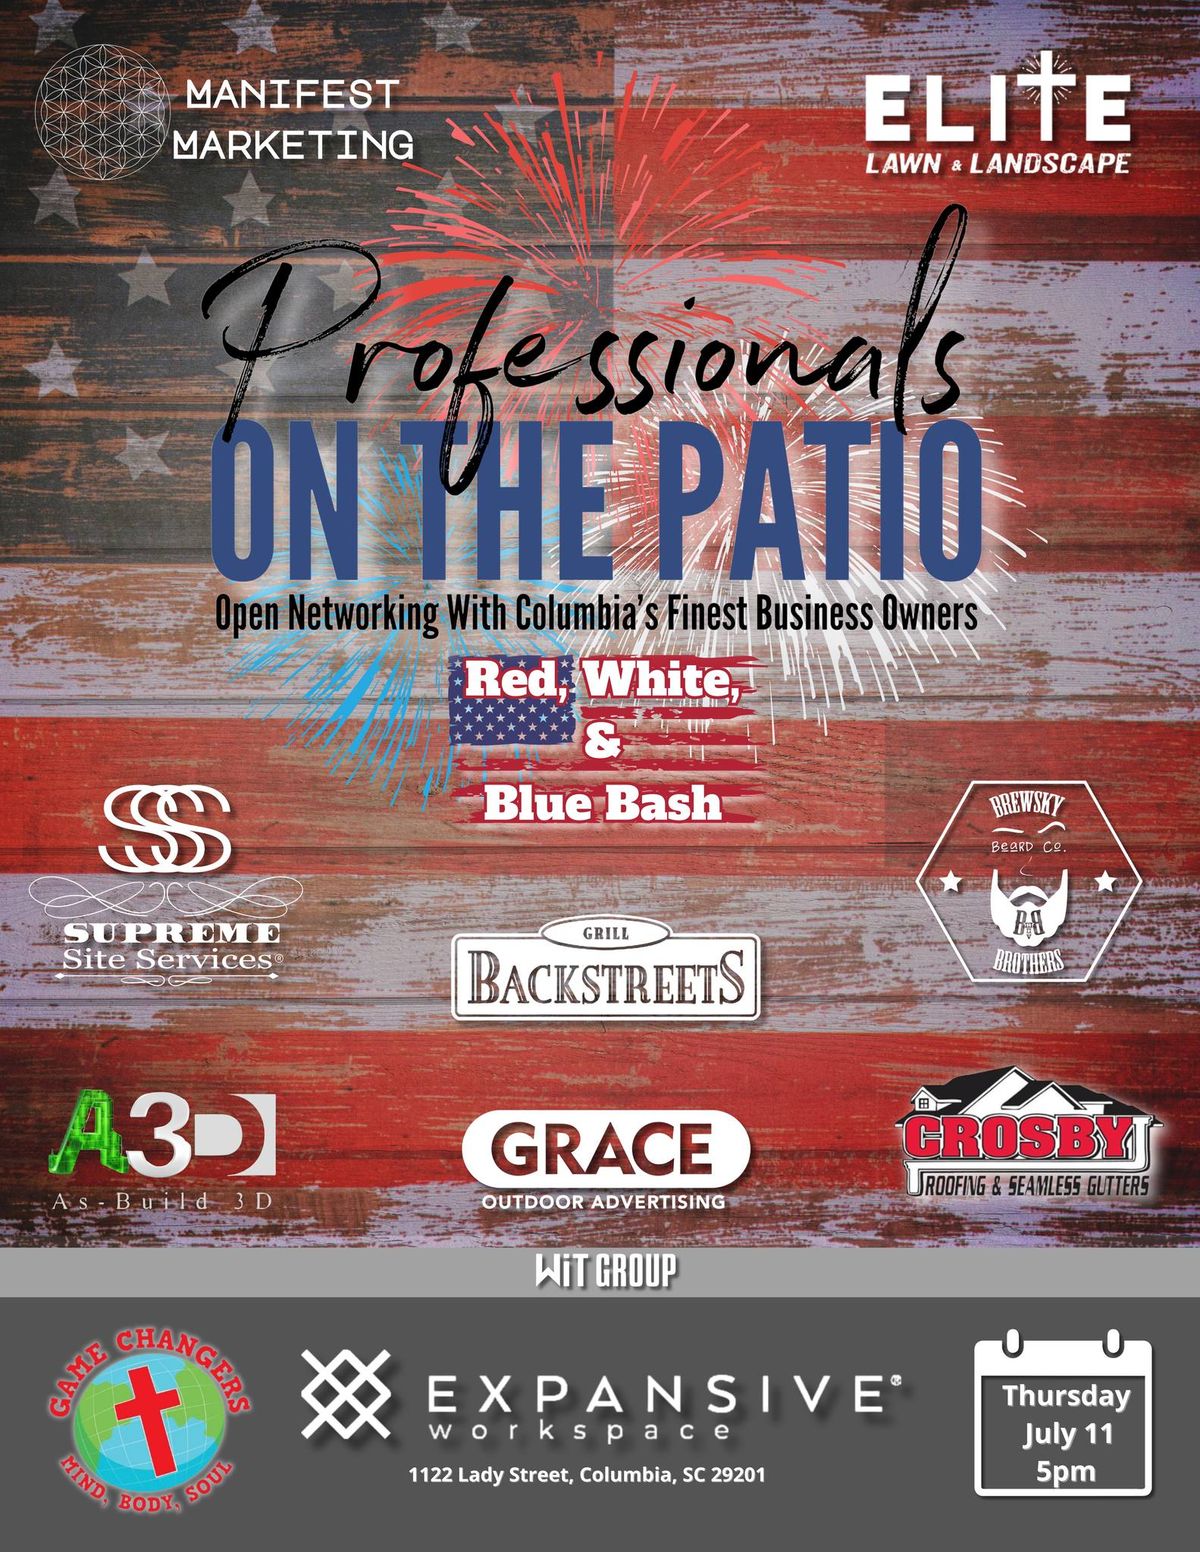 Professionals on the Patio- Red, White, & Blue Bash